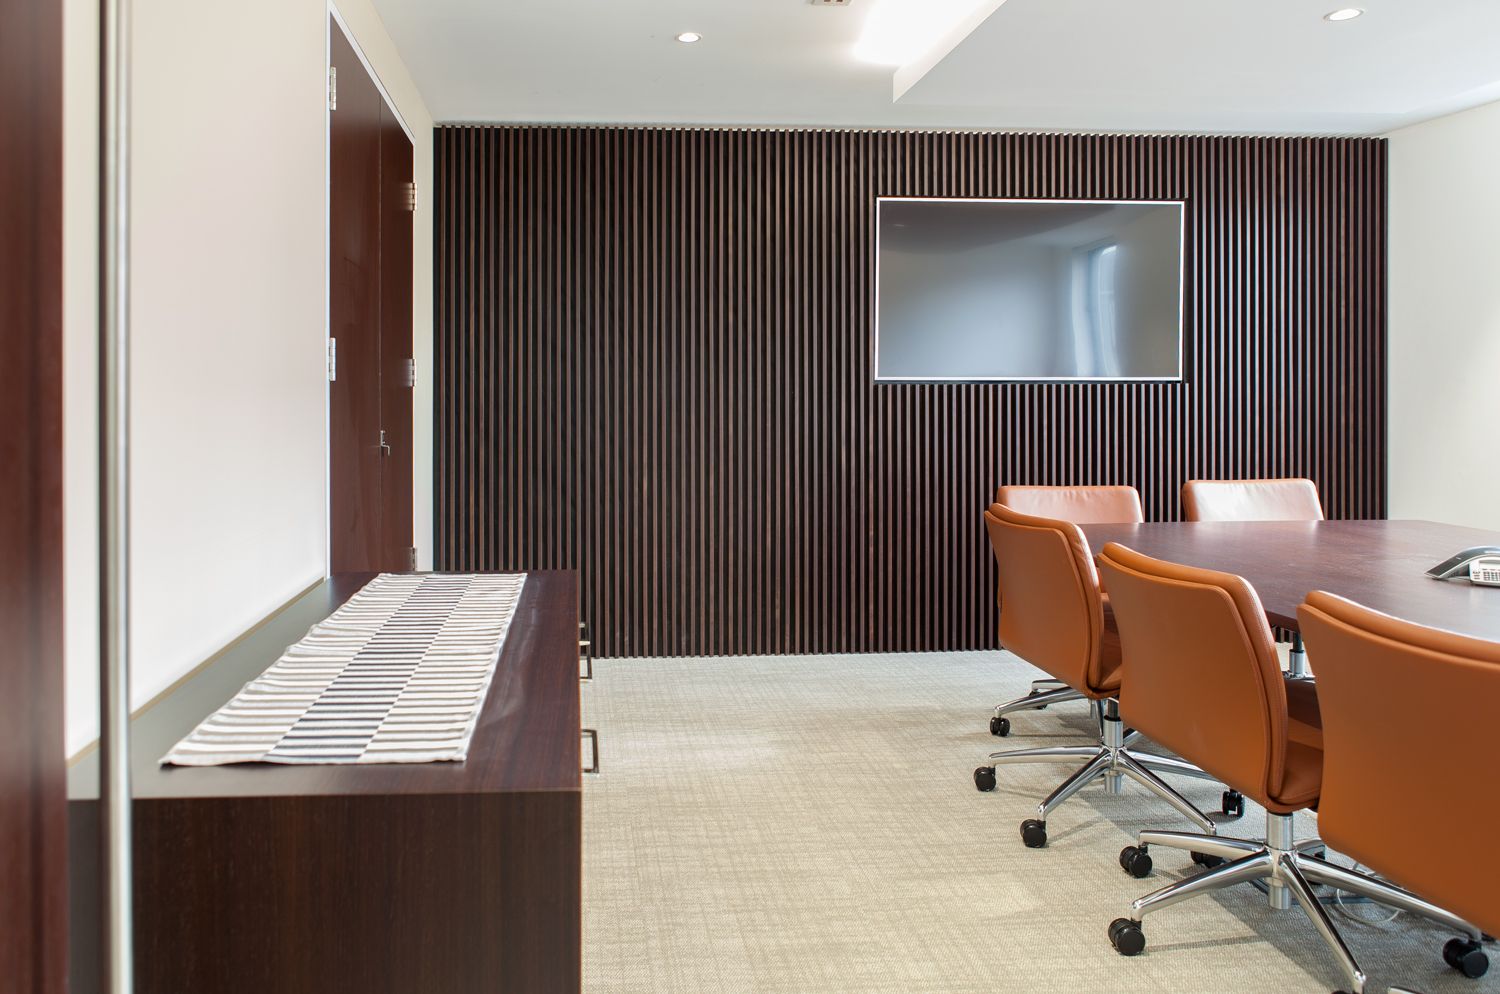 A meeting room with a sideboard, meeting table and a wall-mounted television.